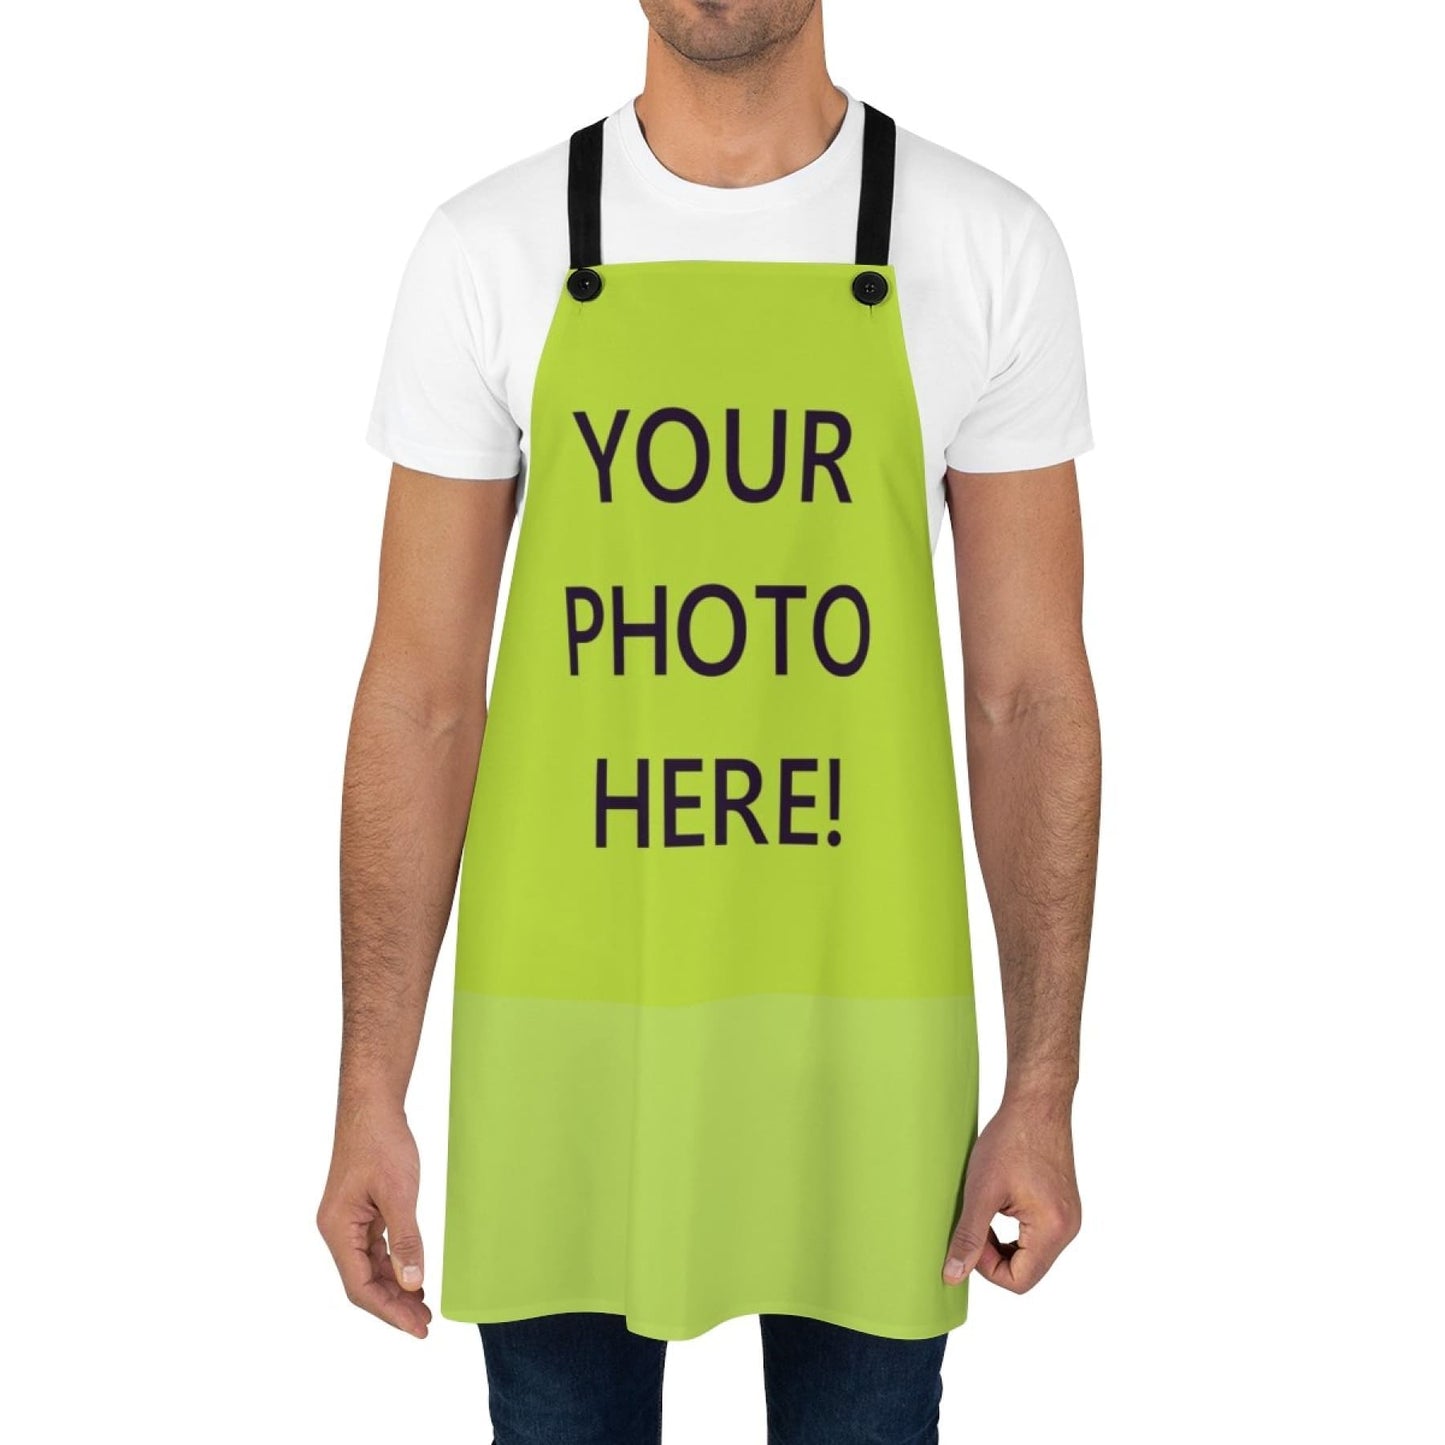 Custom made Apron with your own photo or logo!